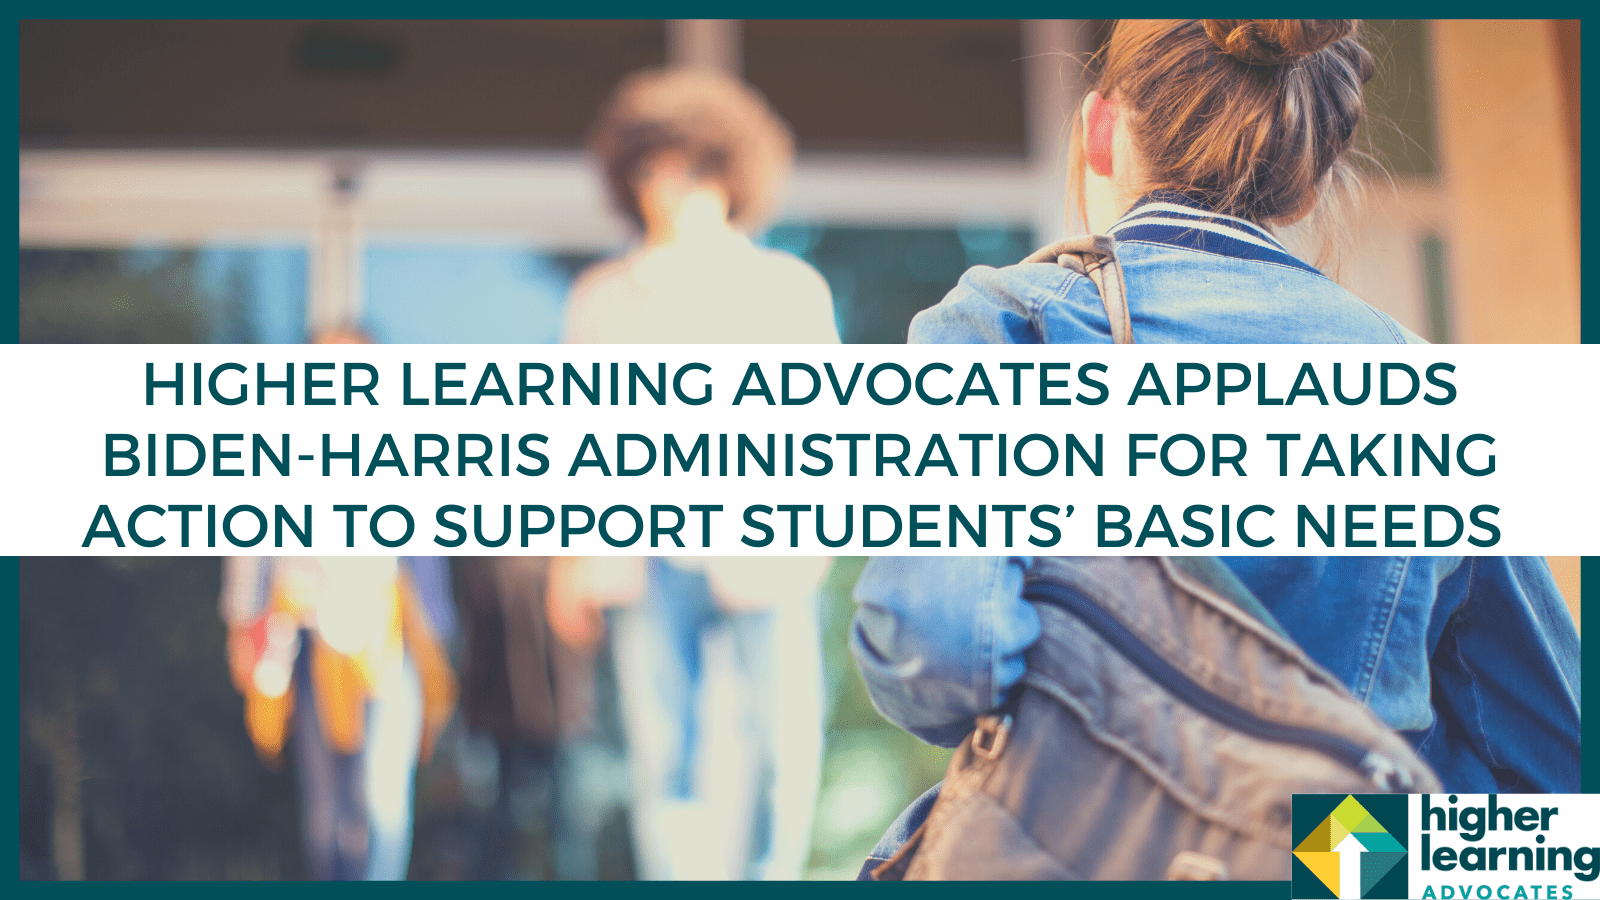 Higher Learning Advocates Applauds the Administration’s Commitment to Today’s Students